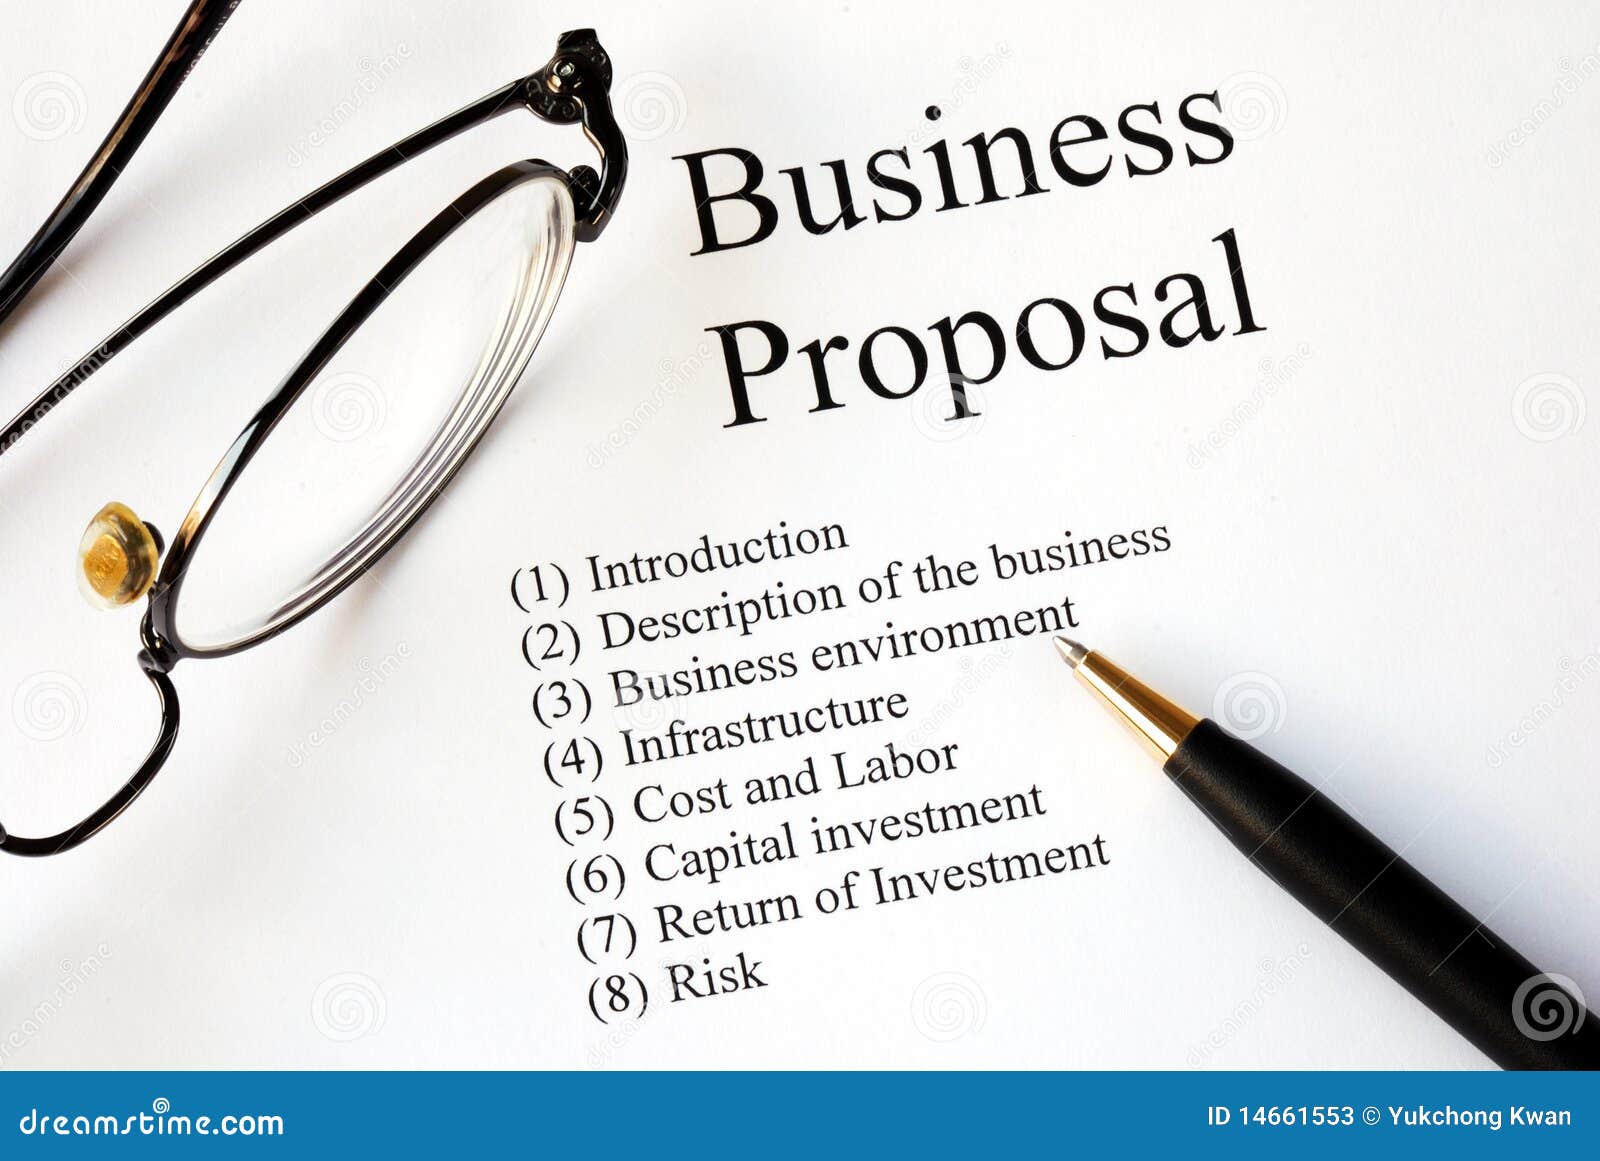 Proposal business 7 Business